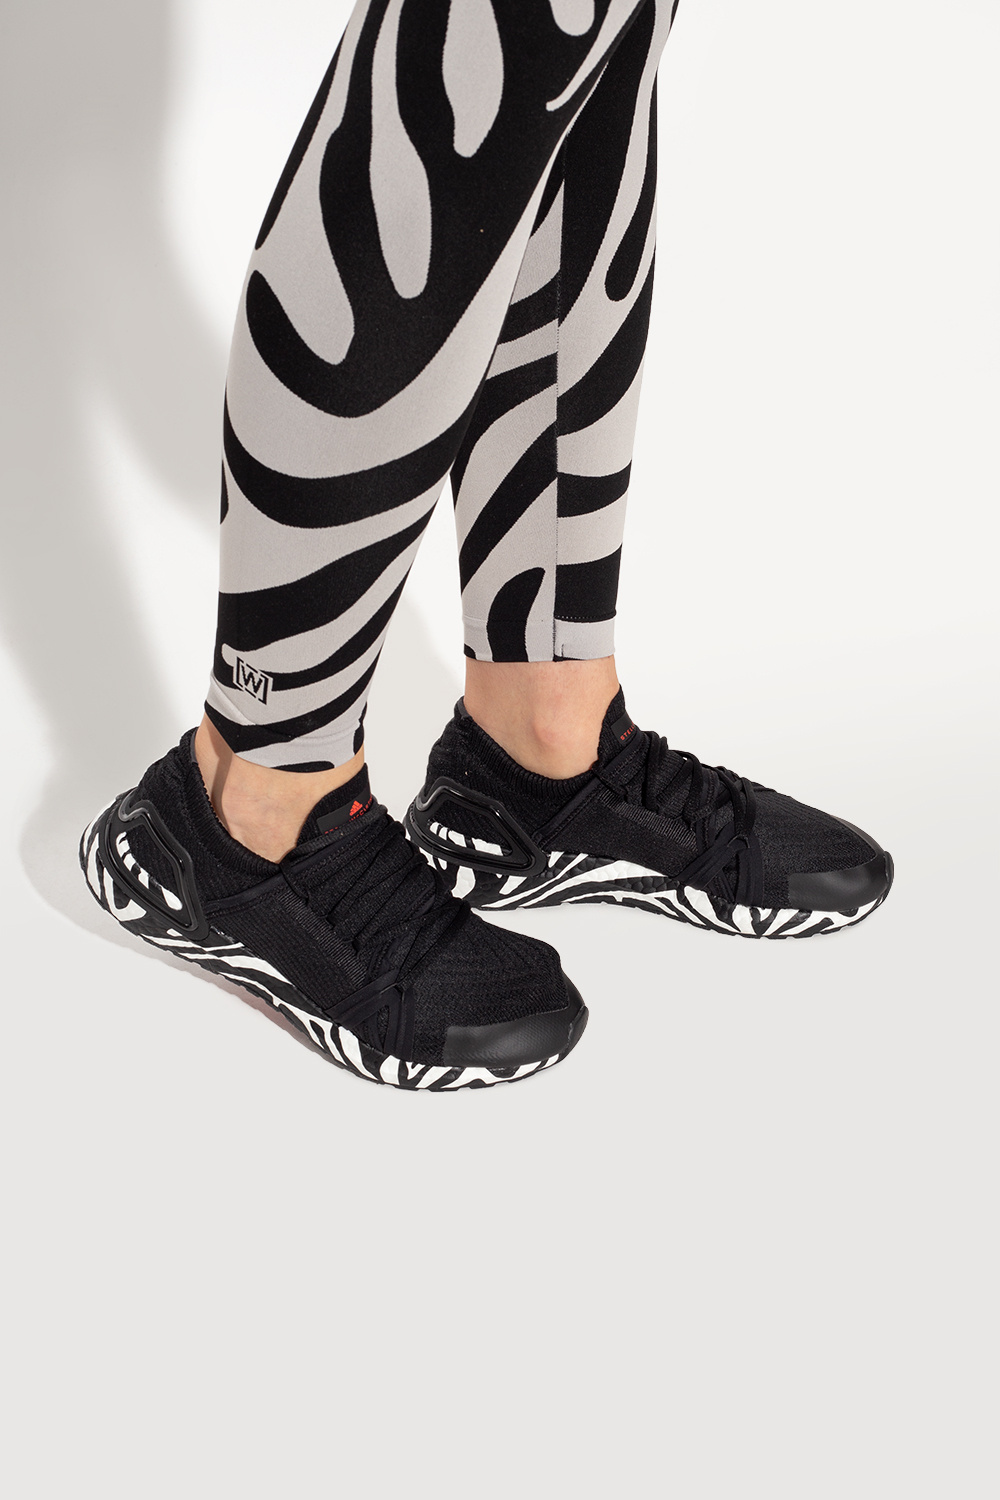 ADIDAS by Stella McCartney ‘UltraBOOST 20 Graphic’ sneakers